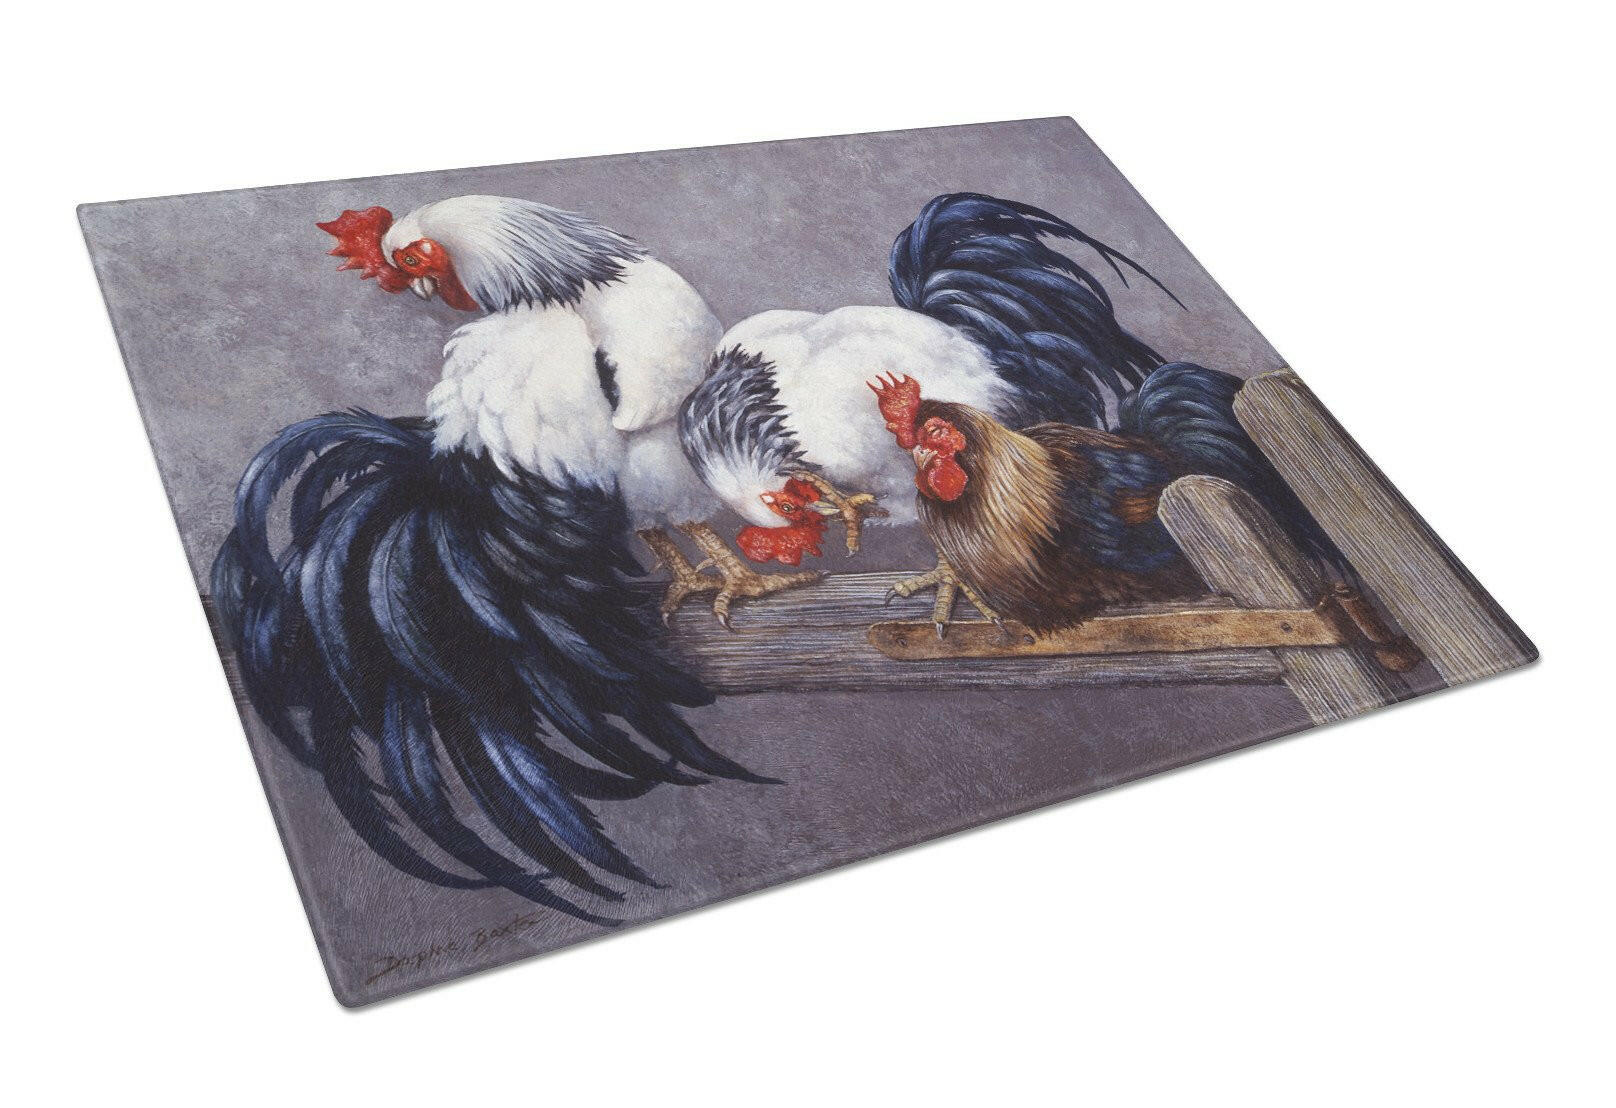 Roosters Roosting Glass Cutting Board Large BDBA0208LCB by Caroline's Treasures